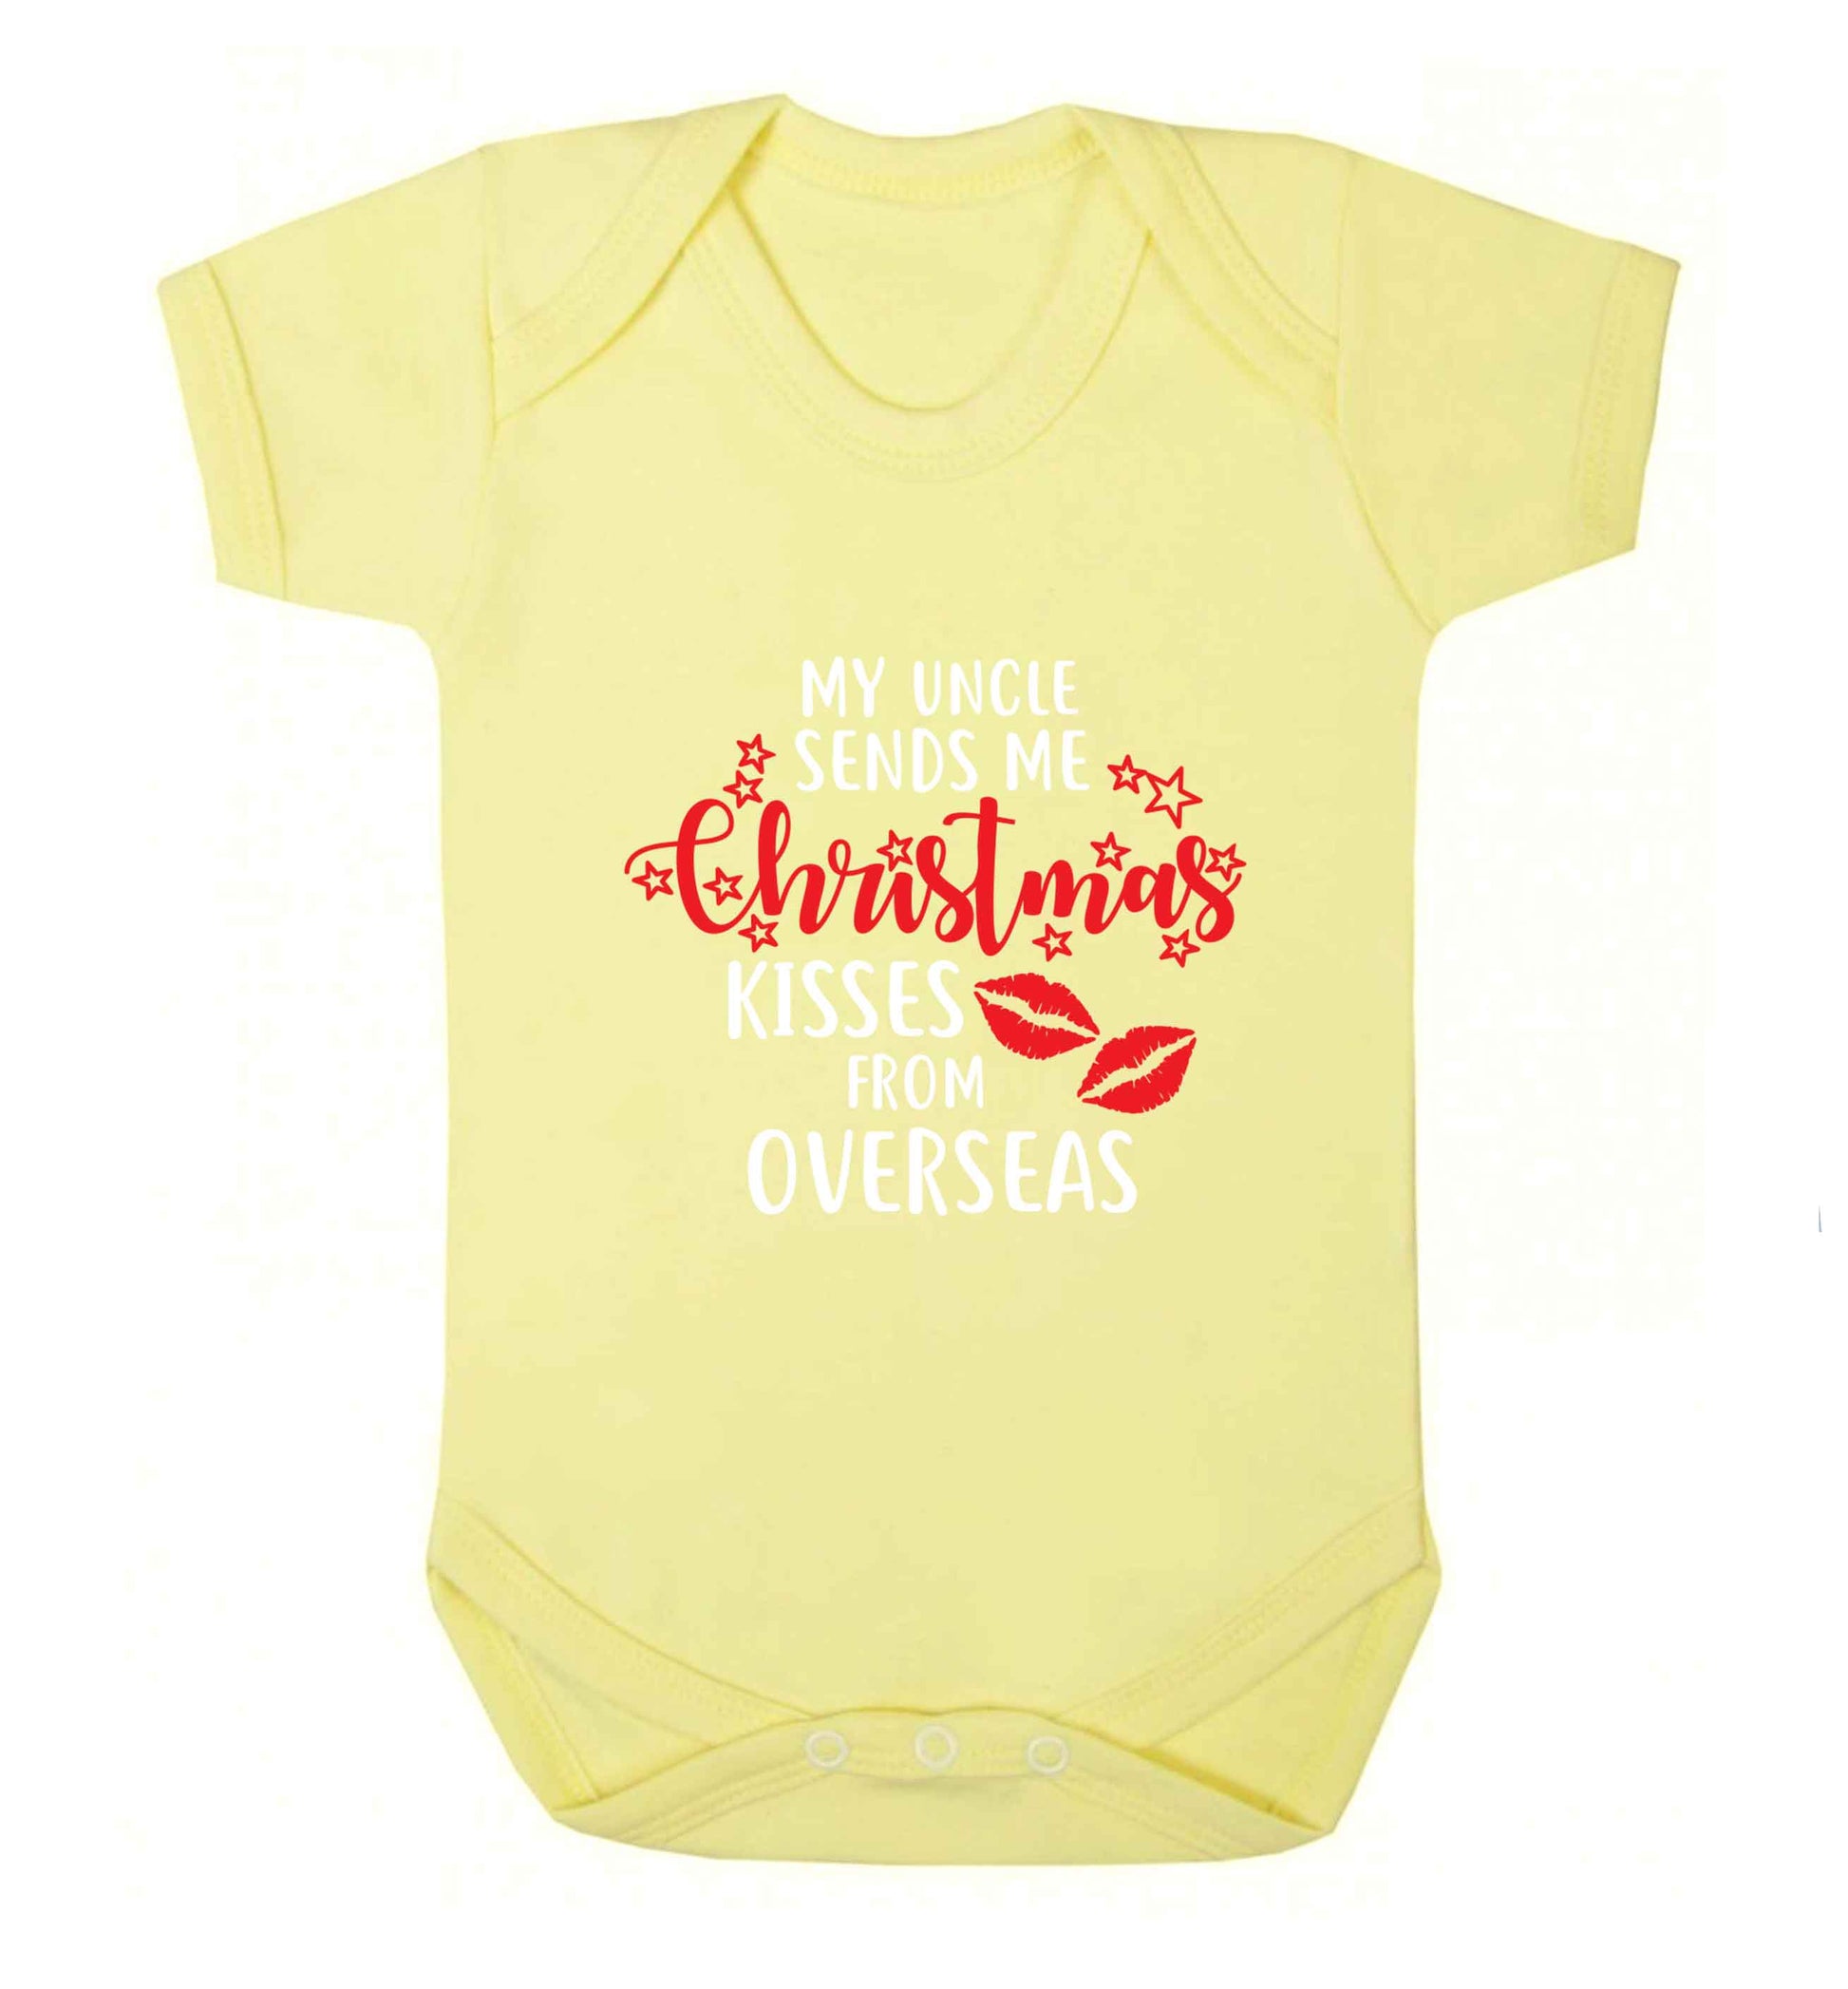 Brother Christmas Kisses Overseas baby vest pale yellow 18-24 months